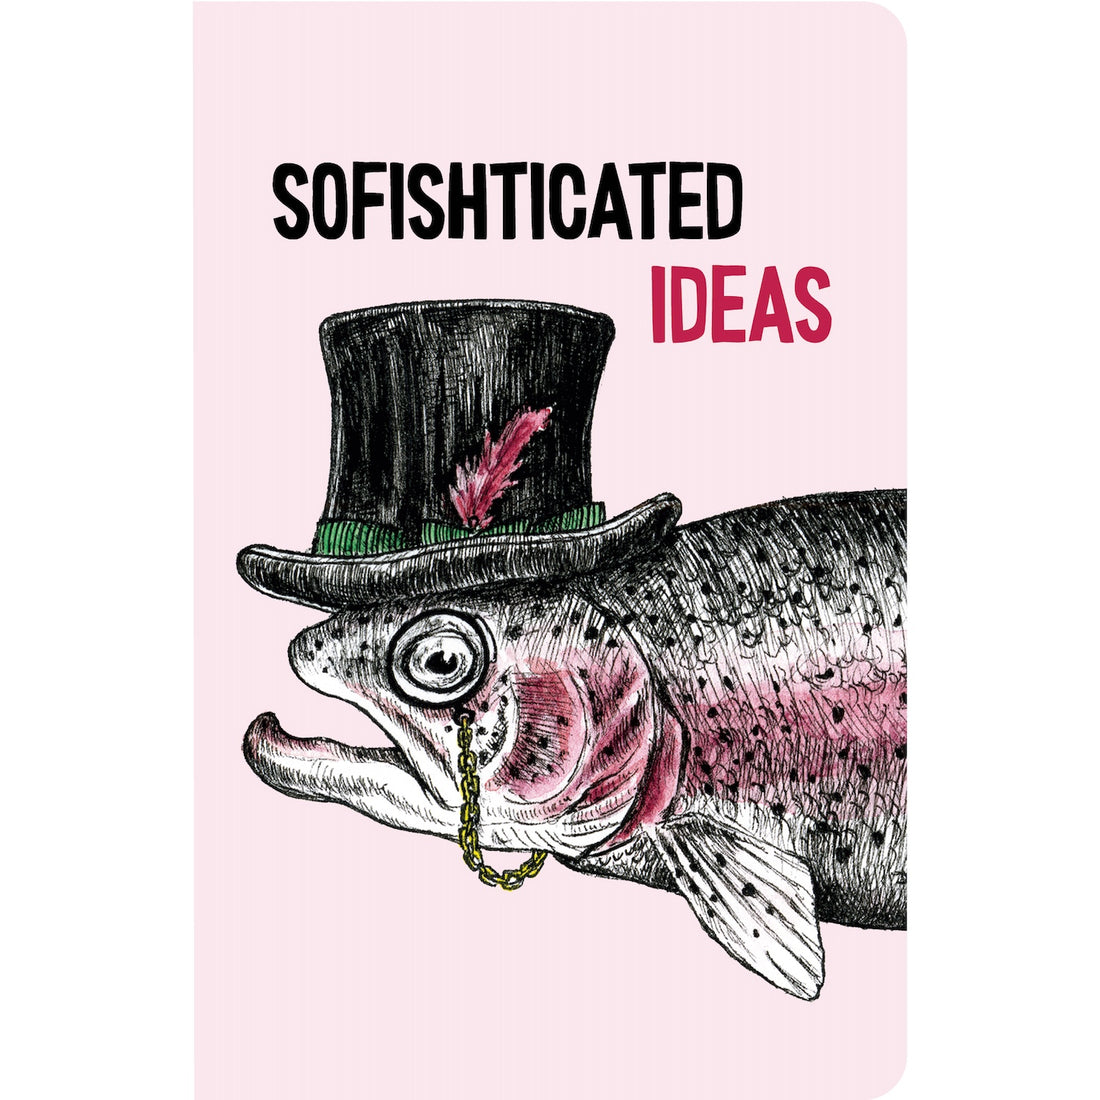 The front cover of the Sofishticated Ideas Notebook is light pink with a funny illustration of a trout wearing a top hat and monocle, under the caption &quot;SOFISHTICATED IDEAS&quot;.